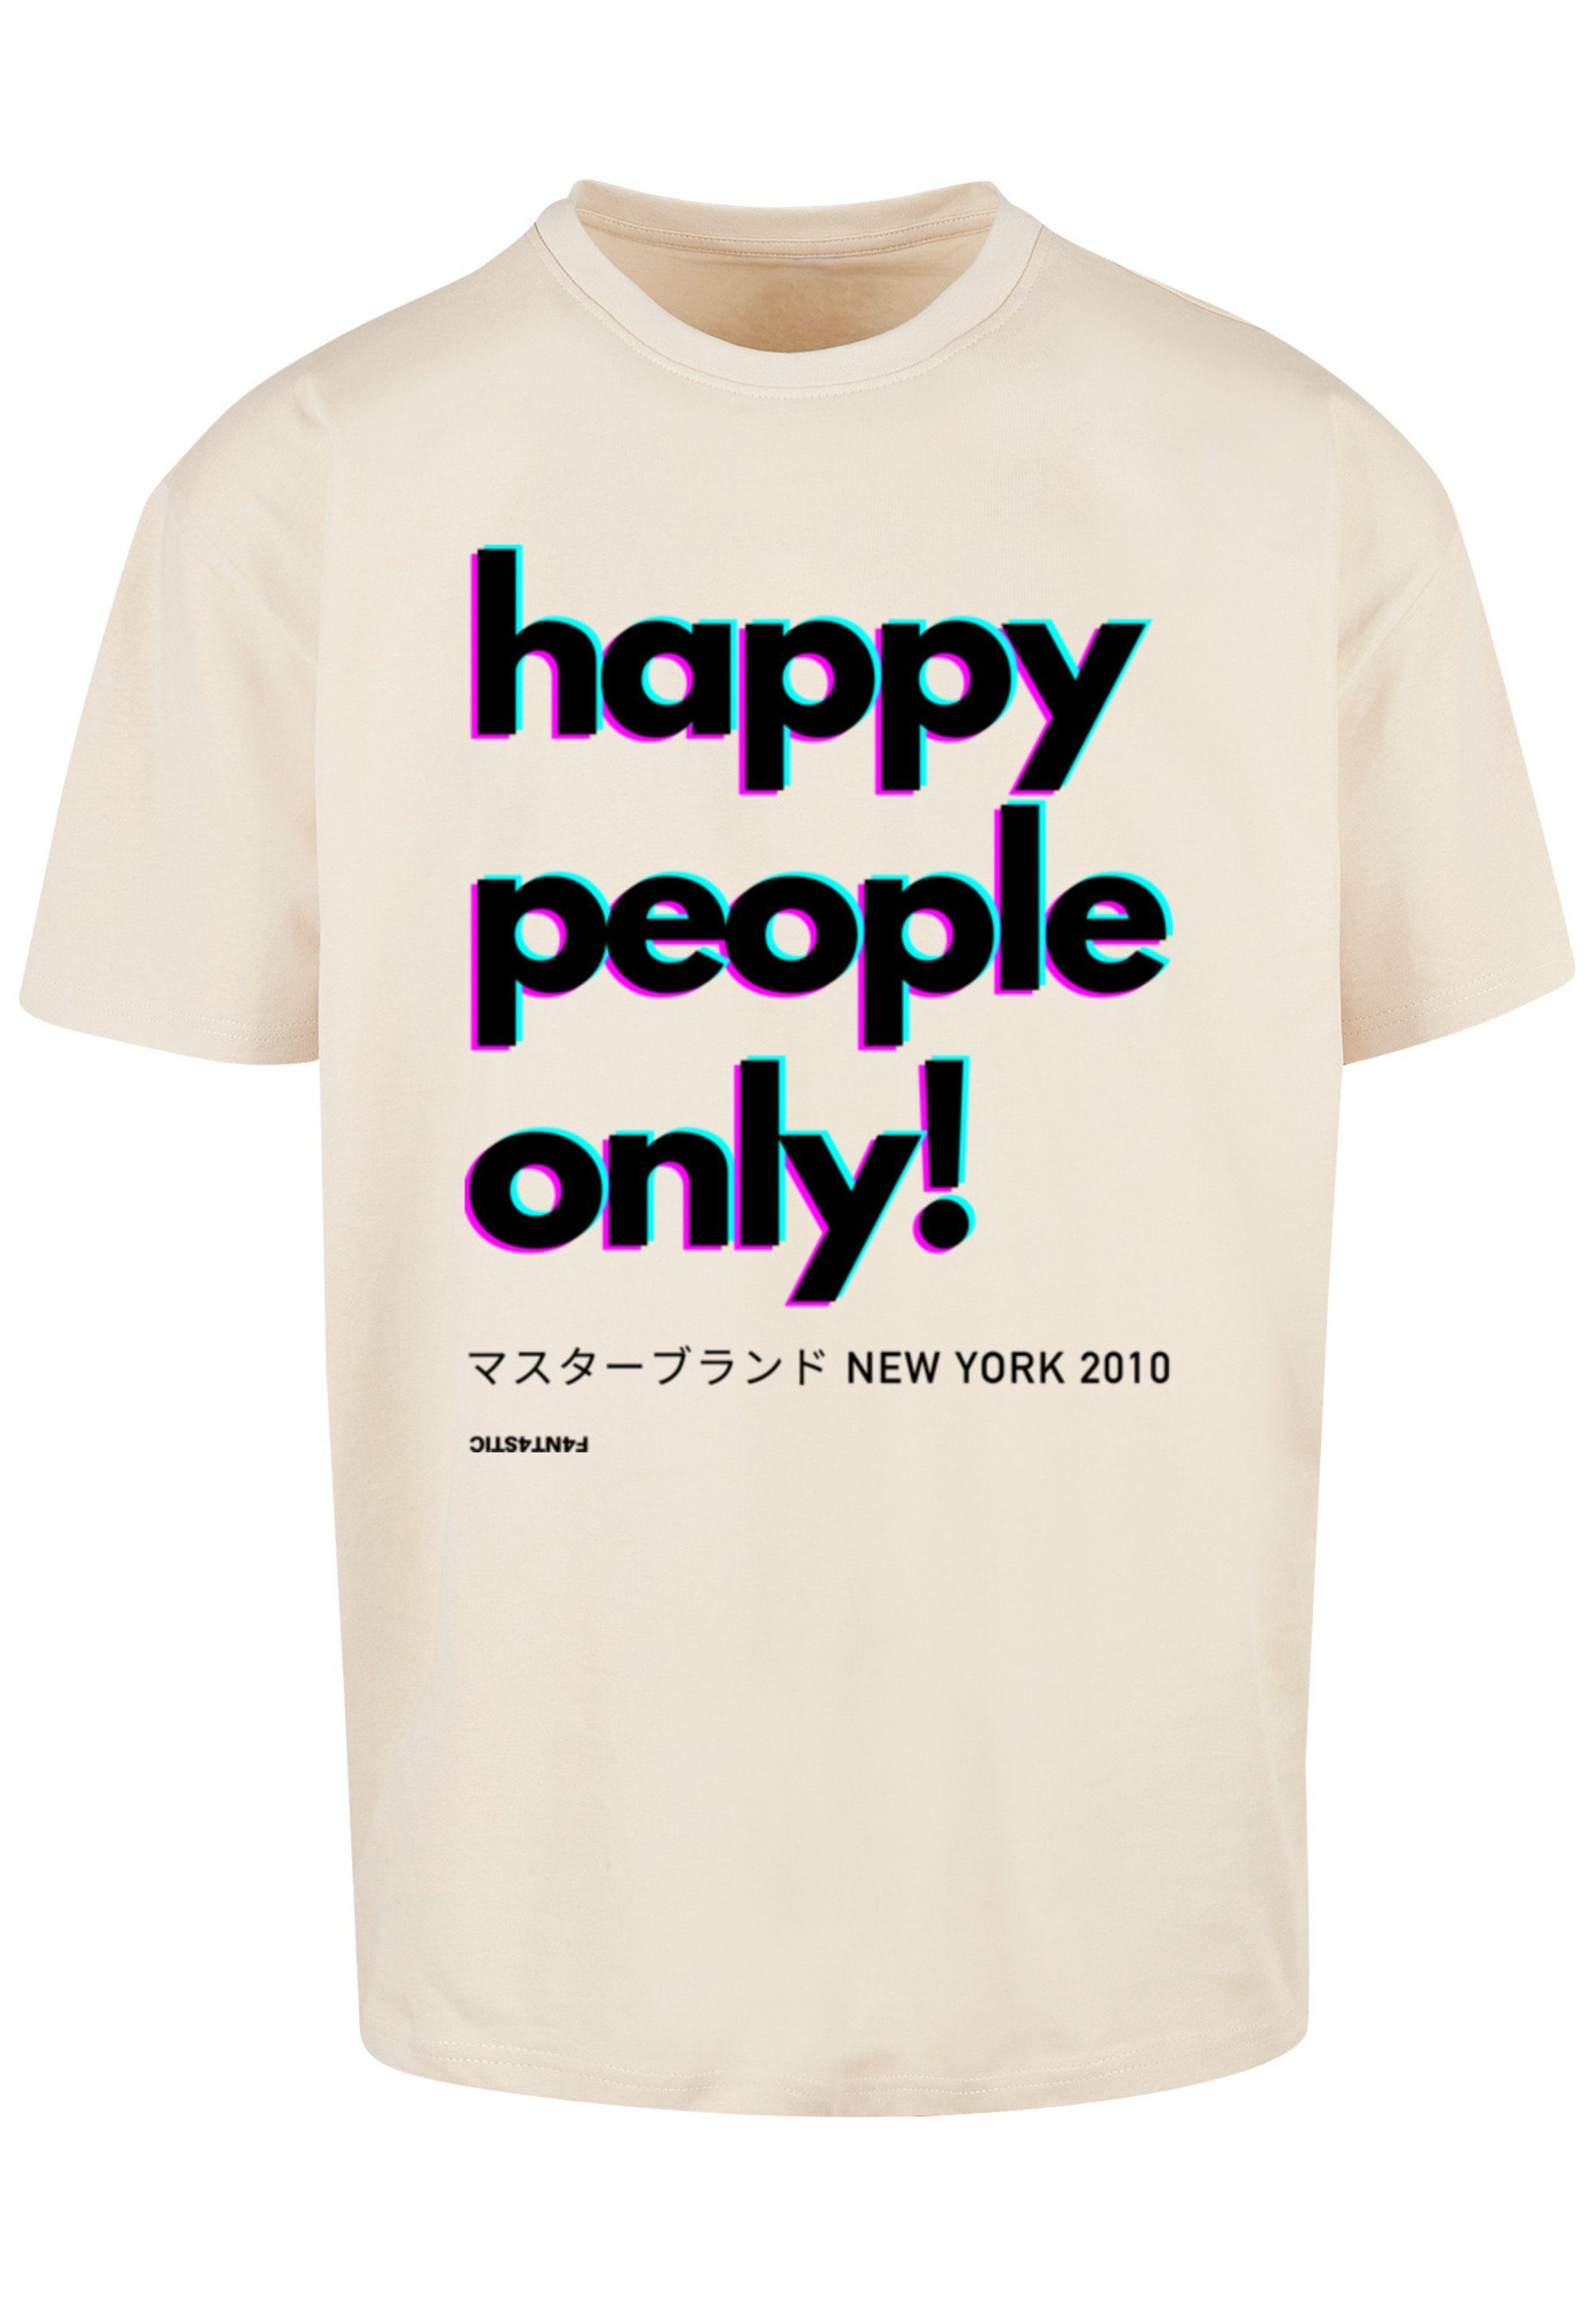 people Happy sand T-Shirt York F4NT4STIC only Print New